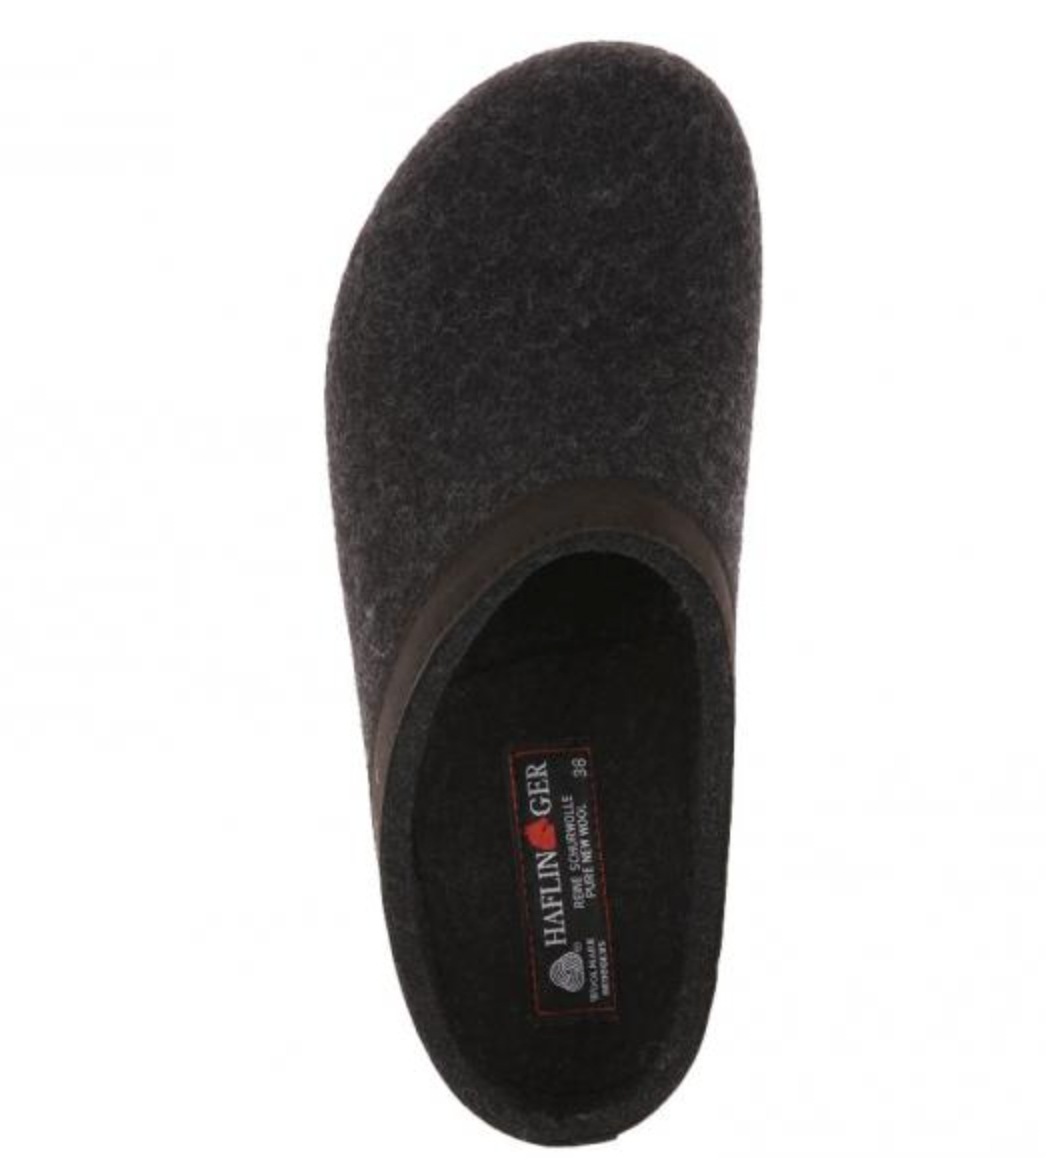 HAFLINGER GZL44 Grizzly Wool Clog Leather Trim Charcoal